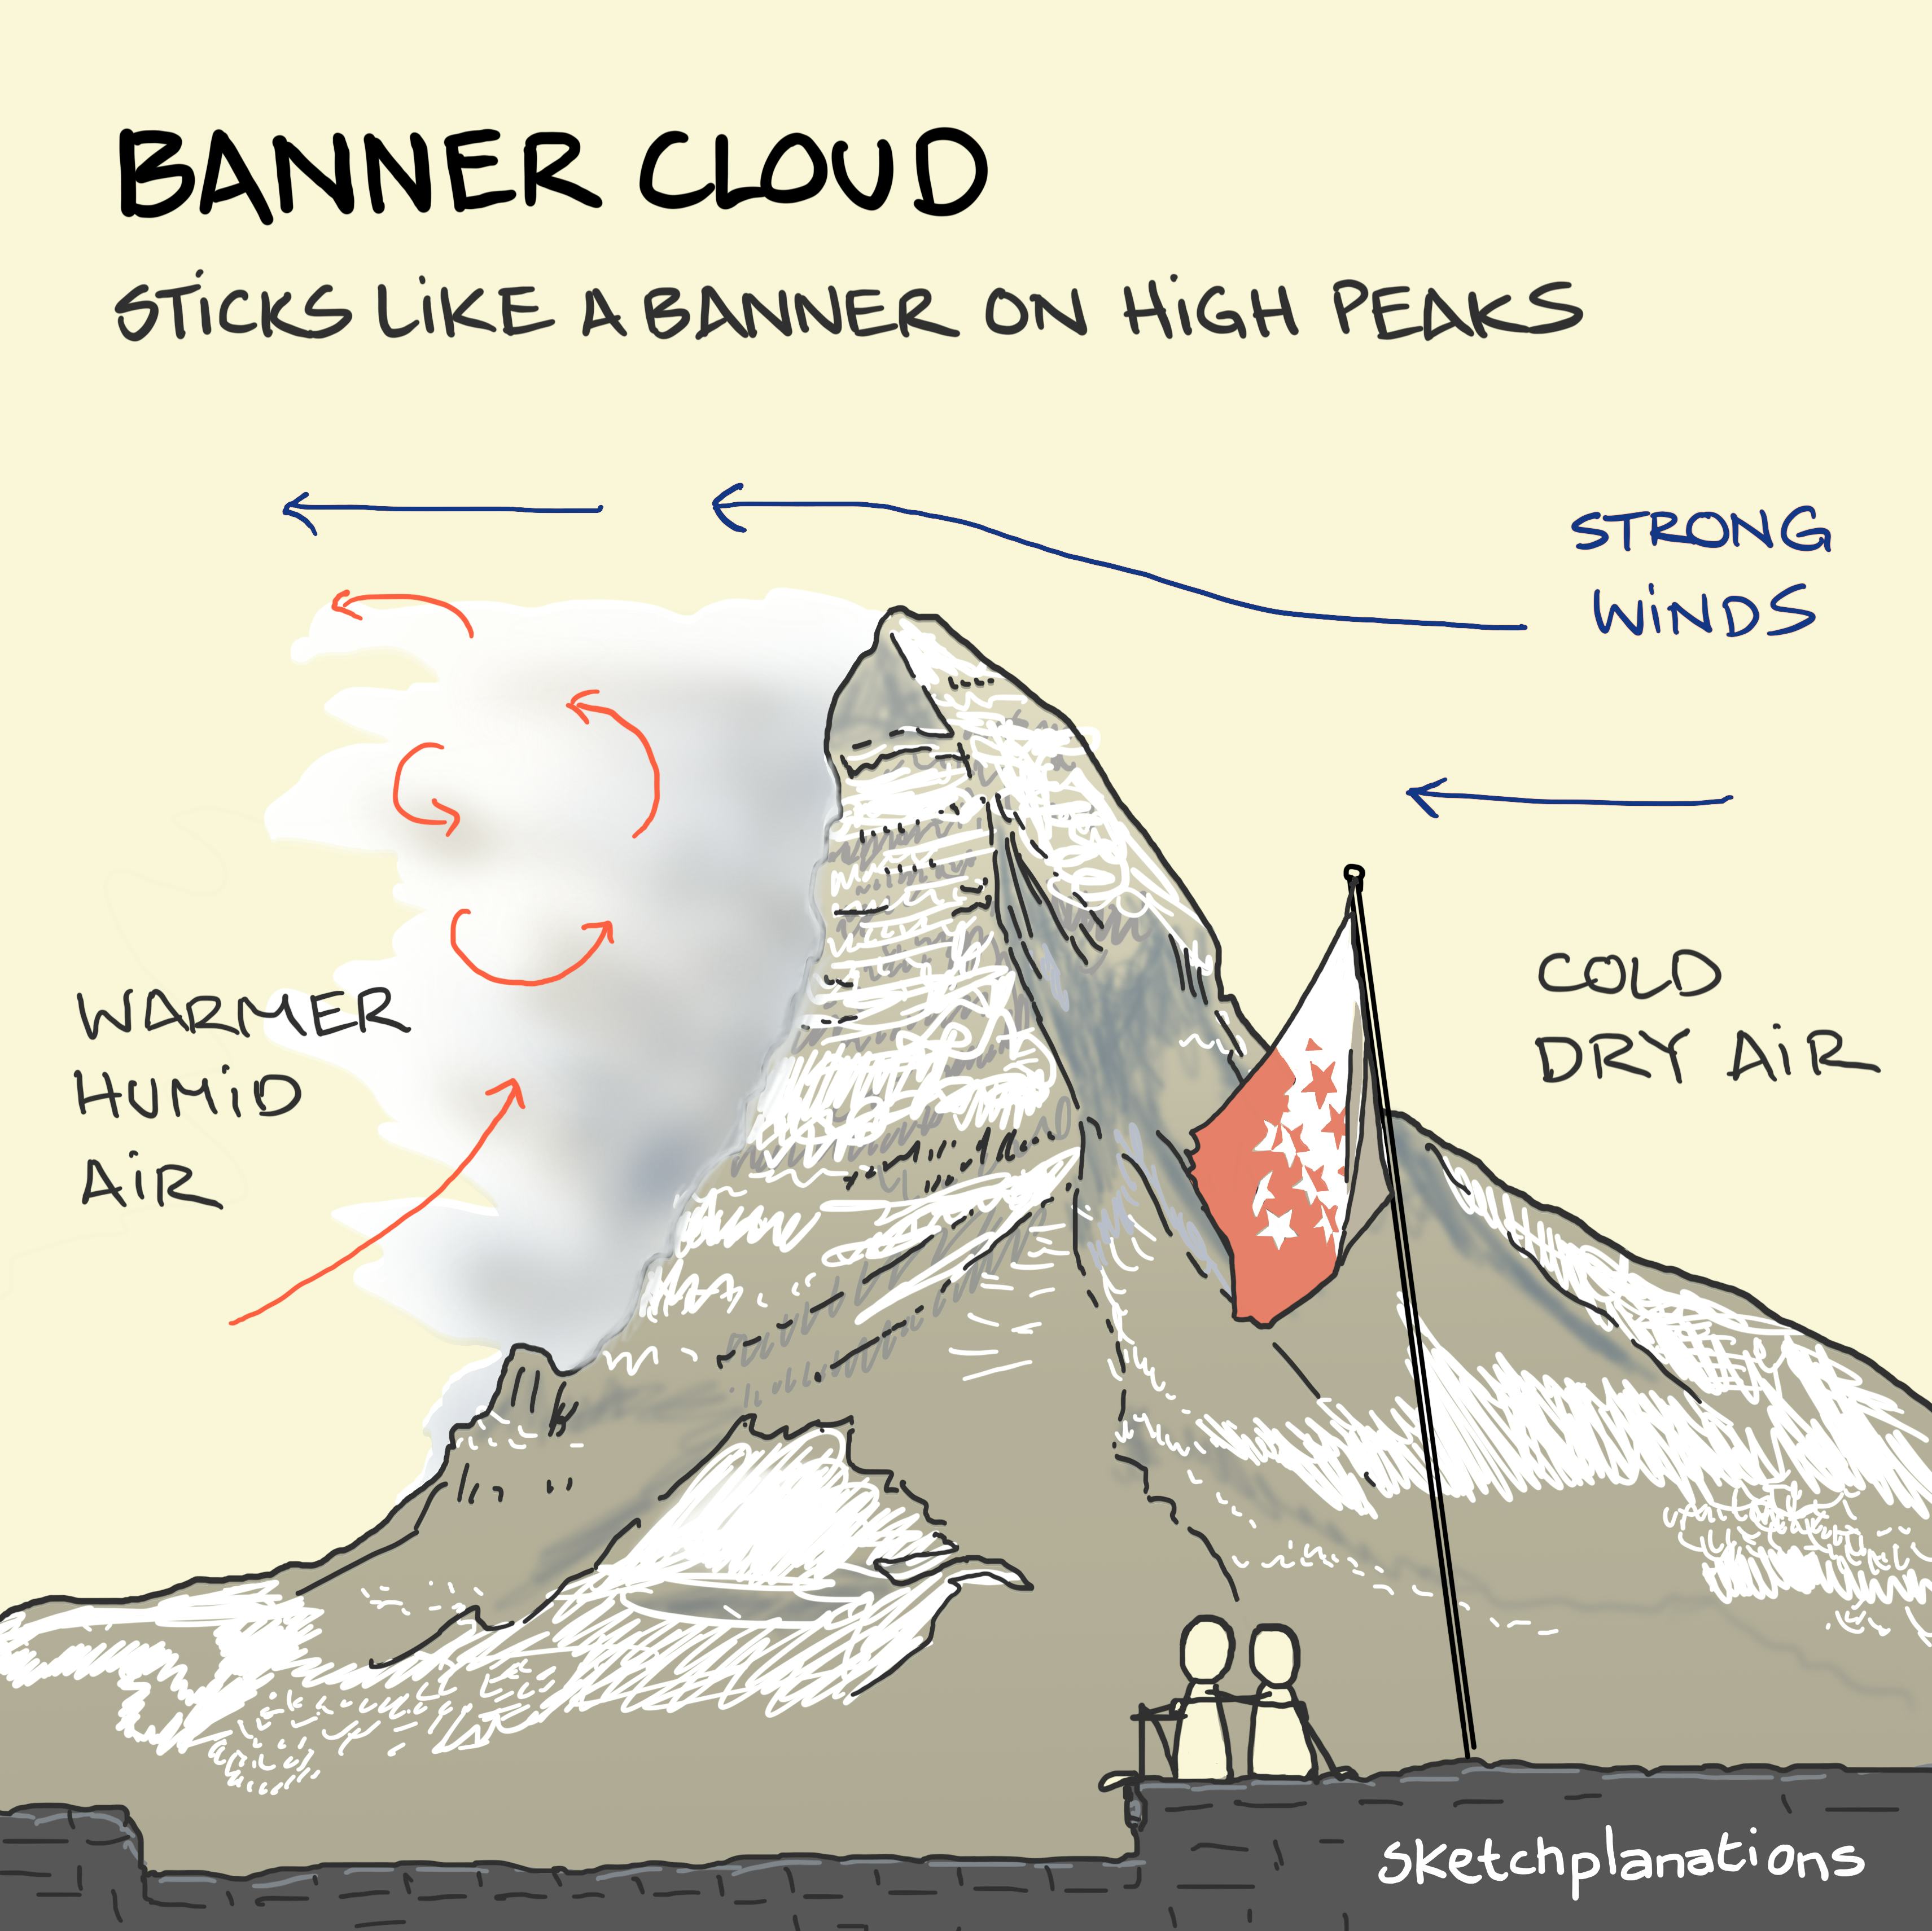 Banner cloud on the Matterhorn showing strong wind of cold dry air on one side and warmer humid air on the other producing the cloud in a banner shape